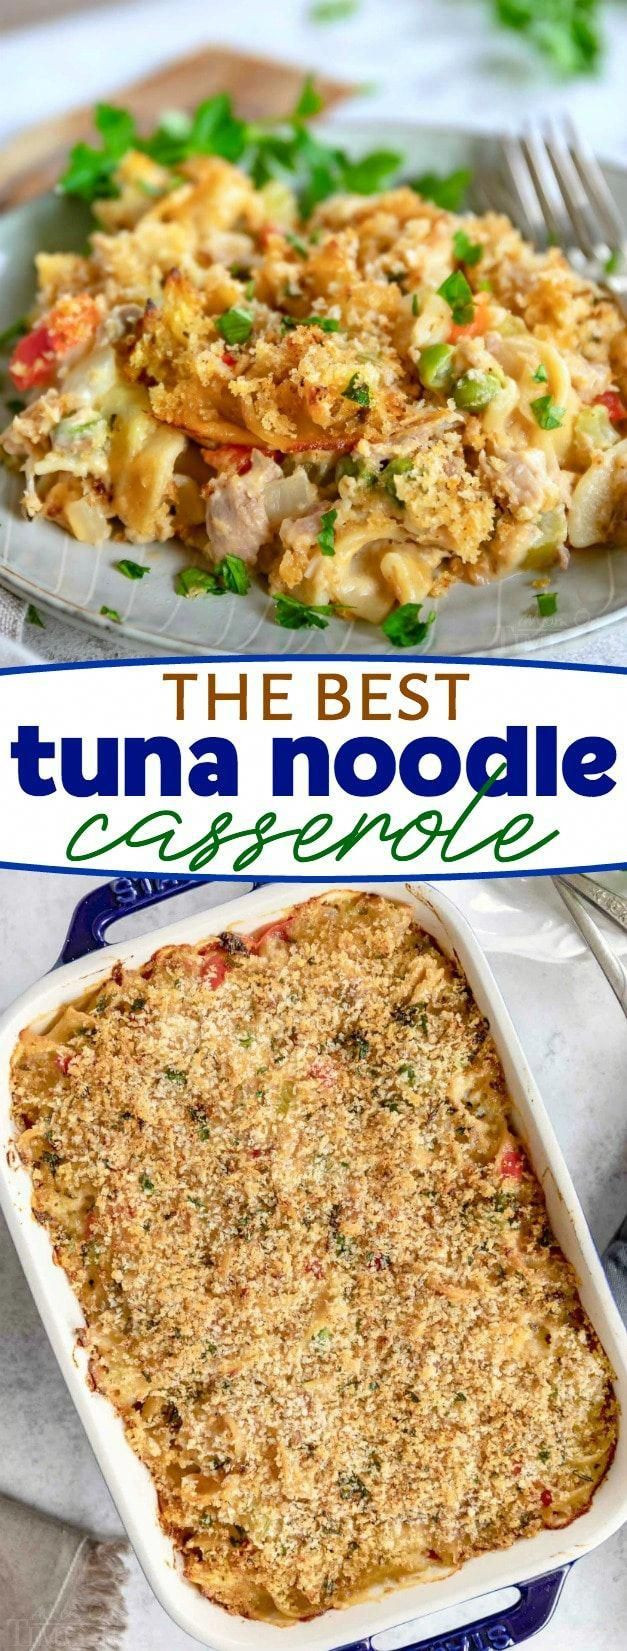 Gourmet Tuna Casserole
 Drink milk for better health With images